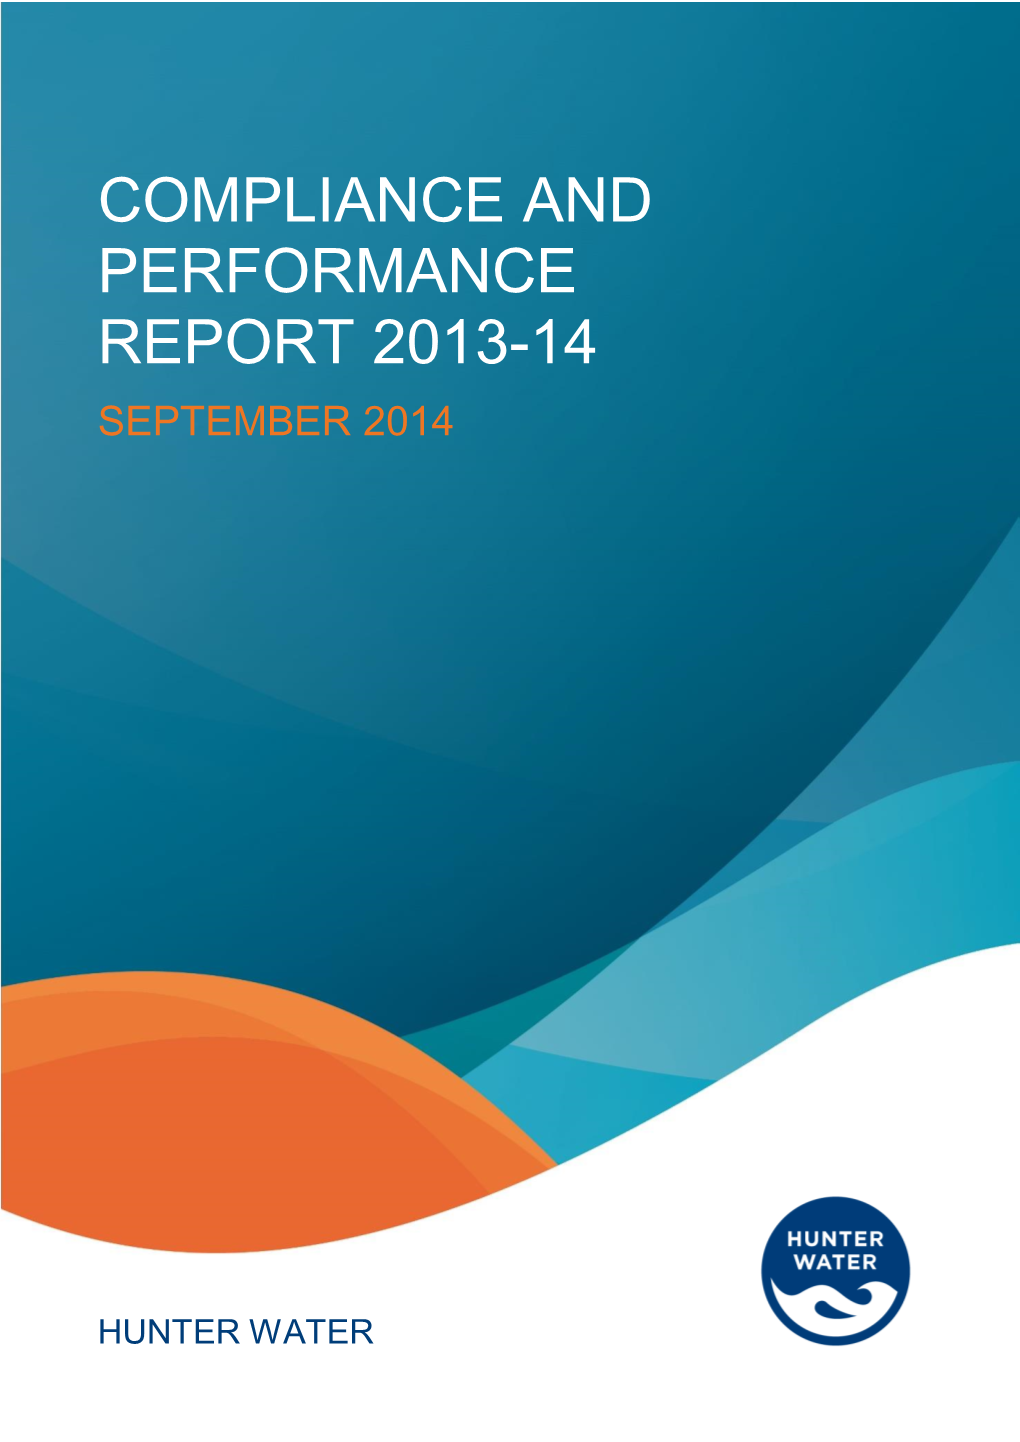 Compliance and Performance Report 2013-14 September 2014